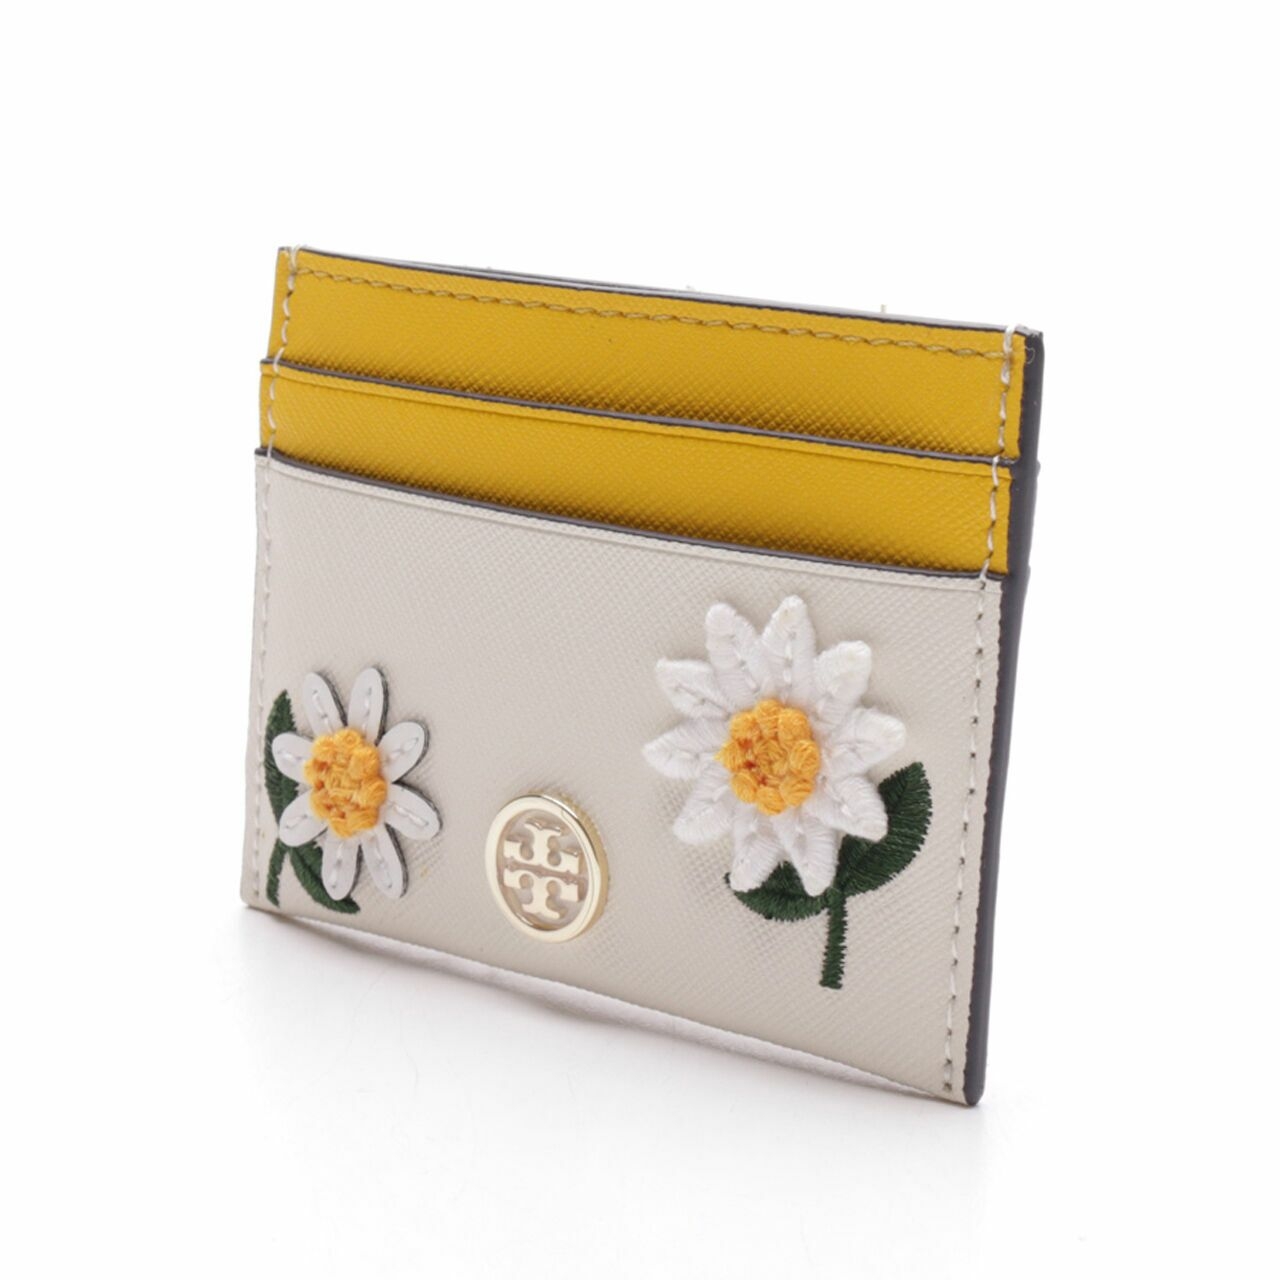 Tory Burch Robinson Floral Embroidered Card Case